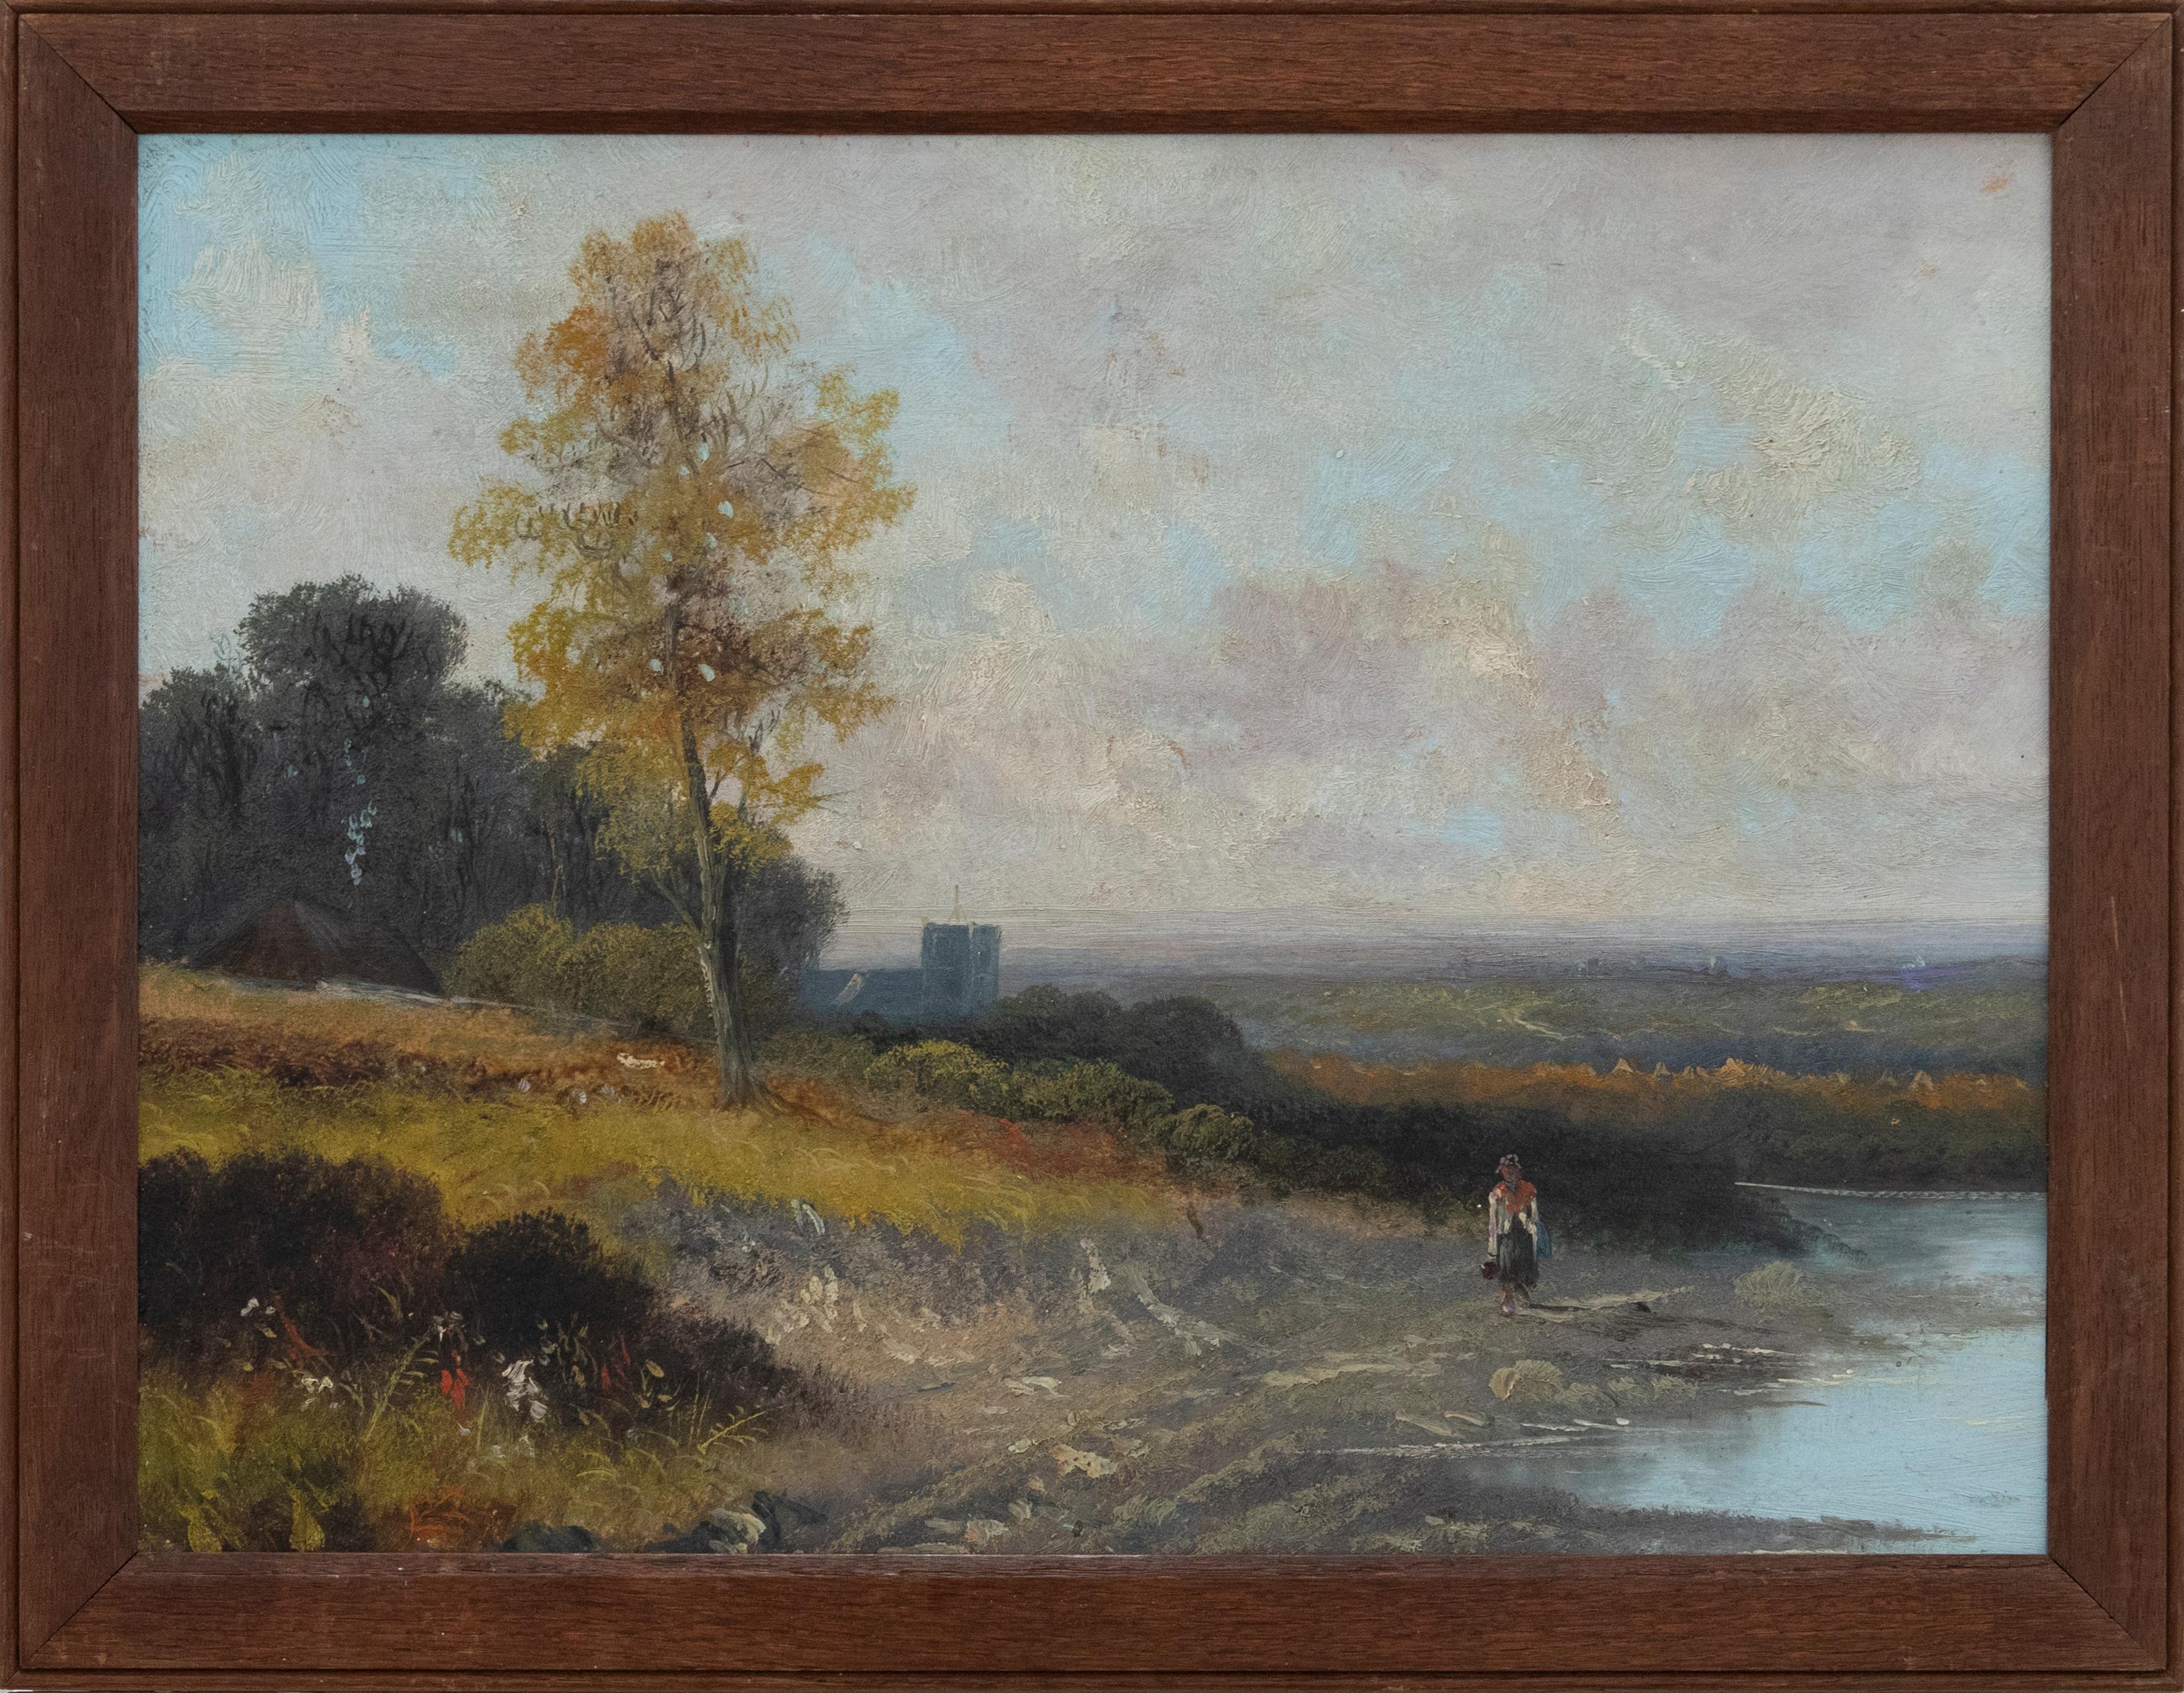 This idyllic, early 20th century oil depicts a female figure walking by a waterway, with church tower and smoking cottage in the background. Well-presented in a hardwood frame. Unsigned. On board. 